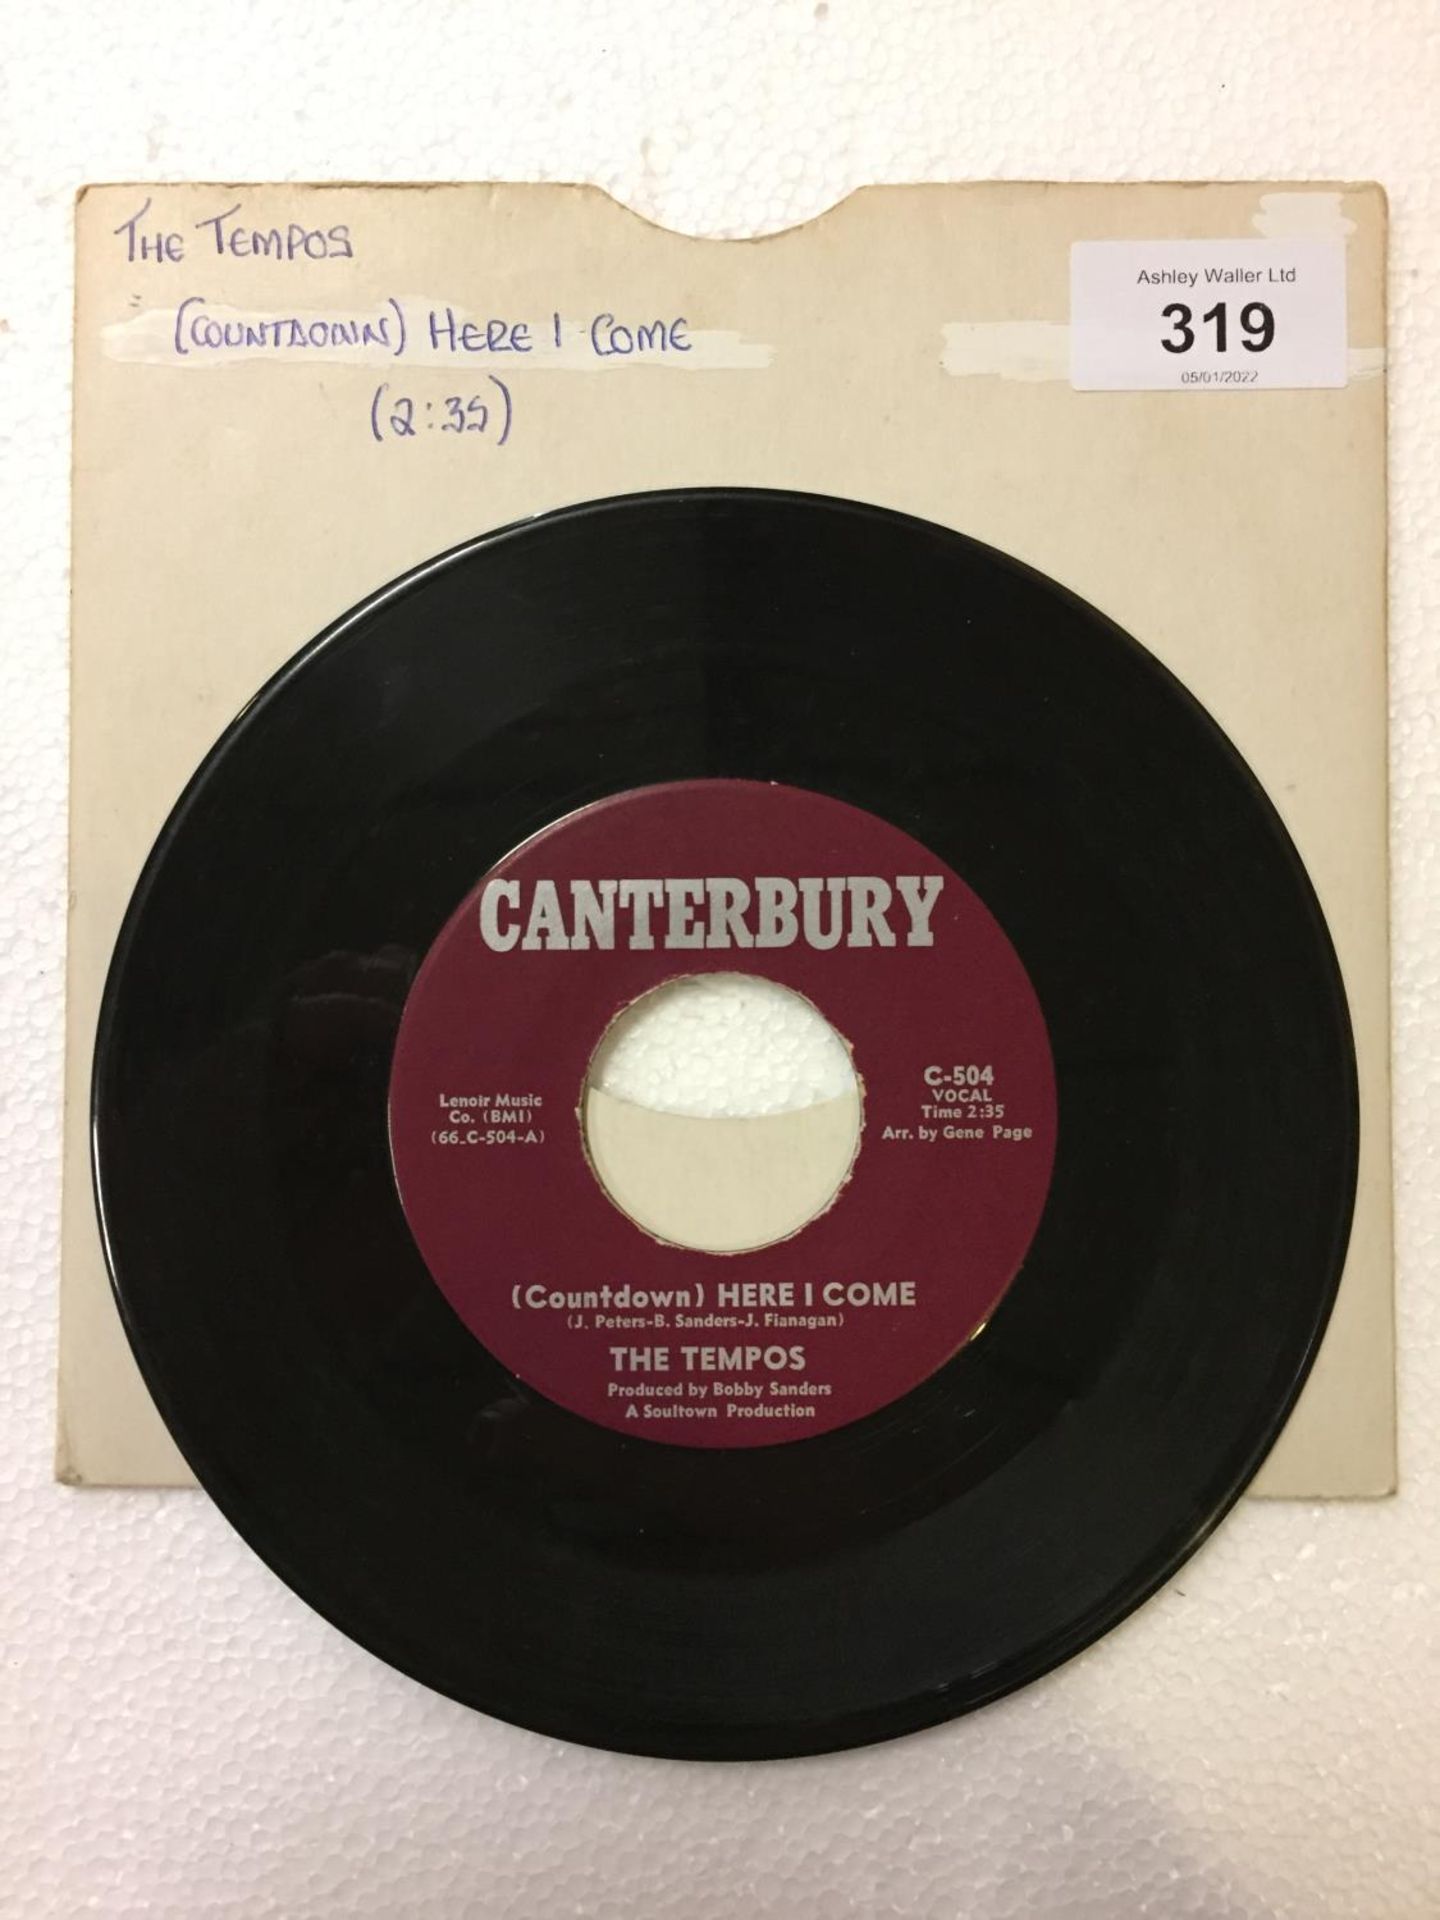 A US RELEASE 7 INCH VINYL FUNK / SOUL RECORD '(COUNTDOWN) HERE I COME' BY THE TEMPOS. LABEL: